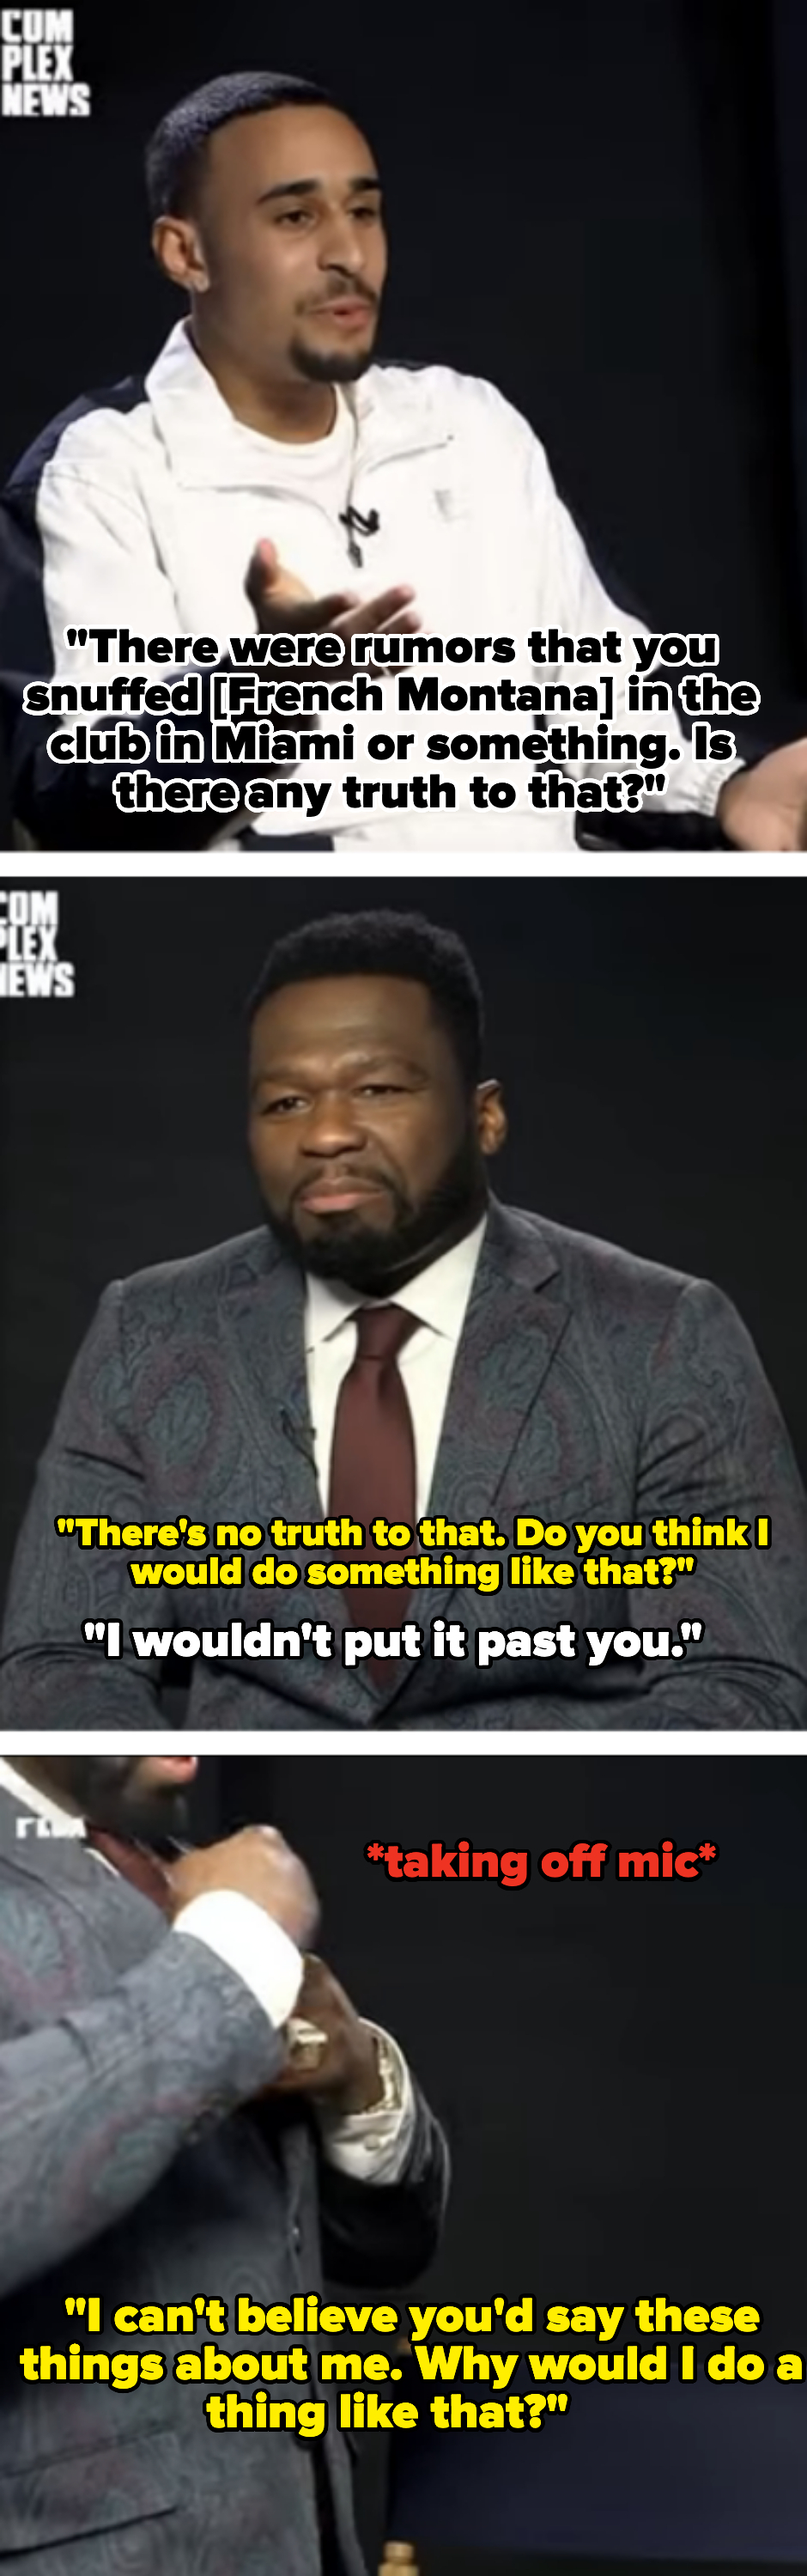 50 cent removing his mic and walking out of the interview